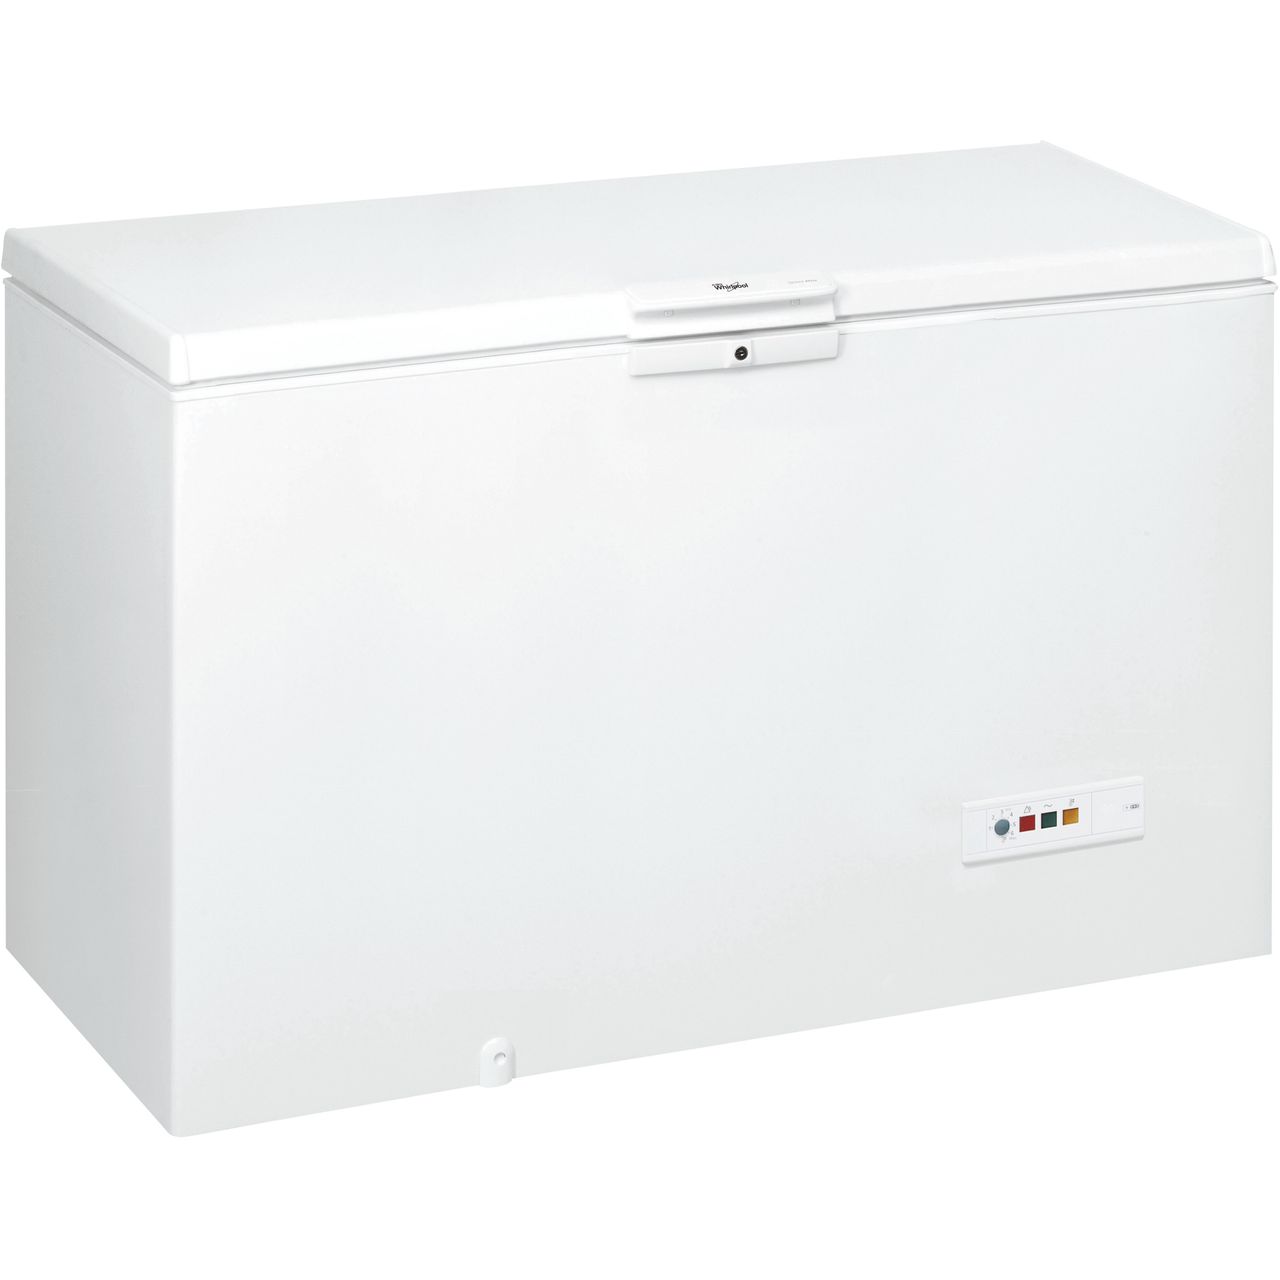 Whirlpool WHM4611.1 Chest Freezer Review